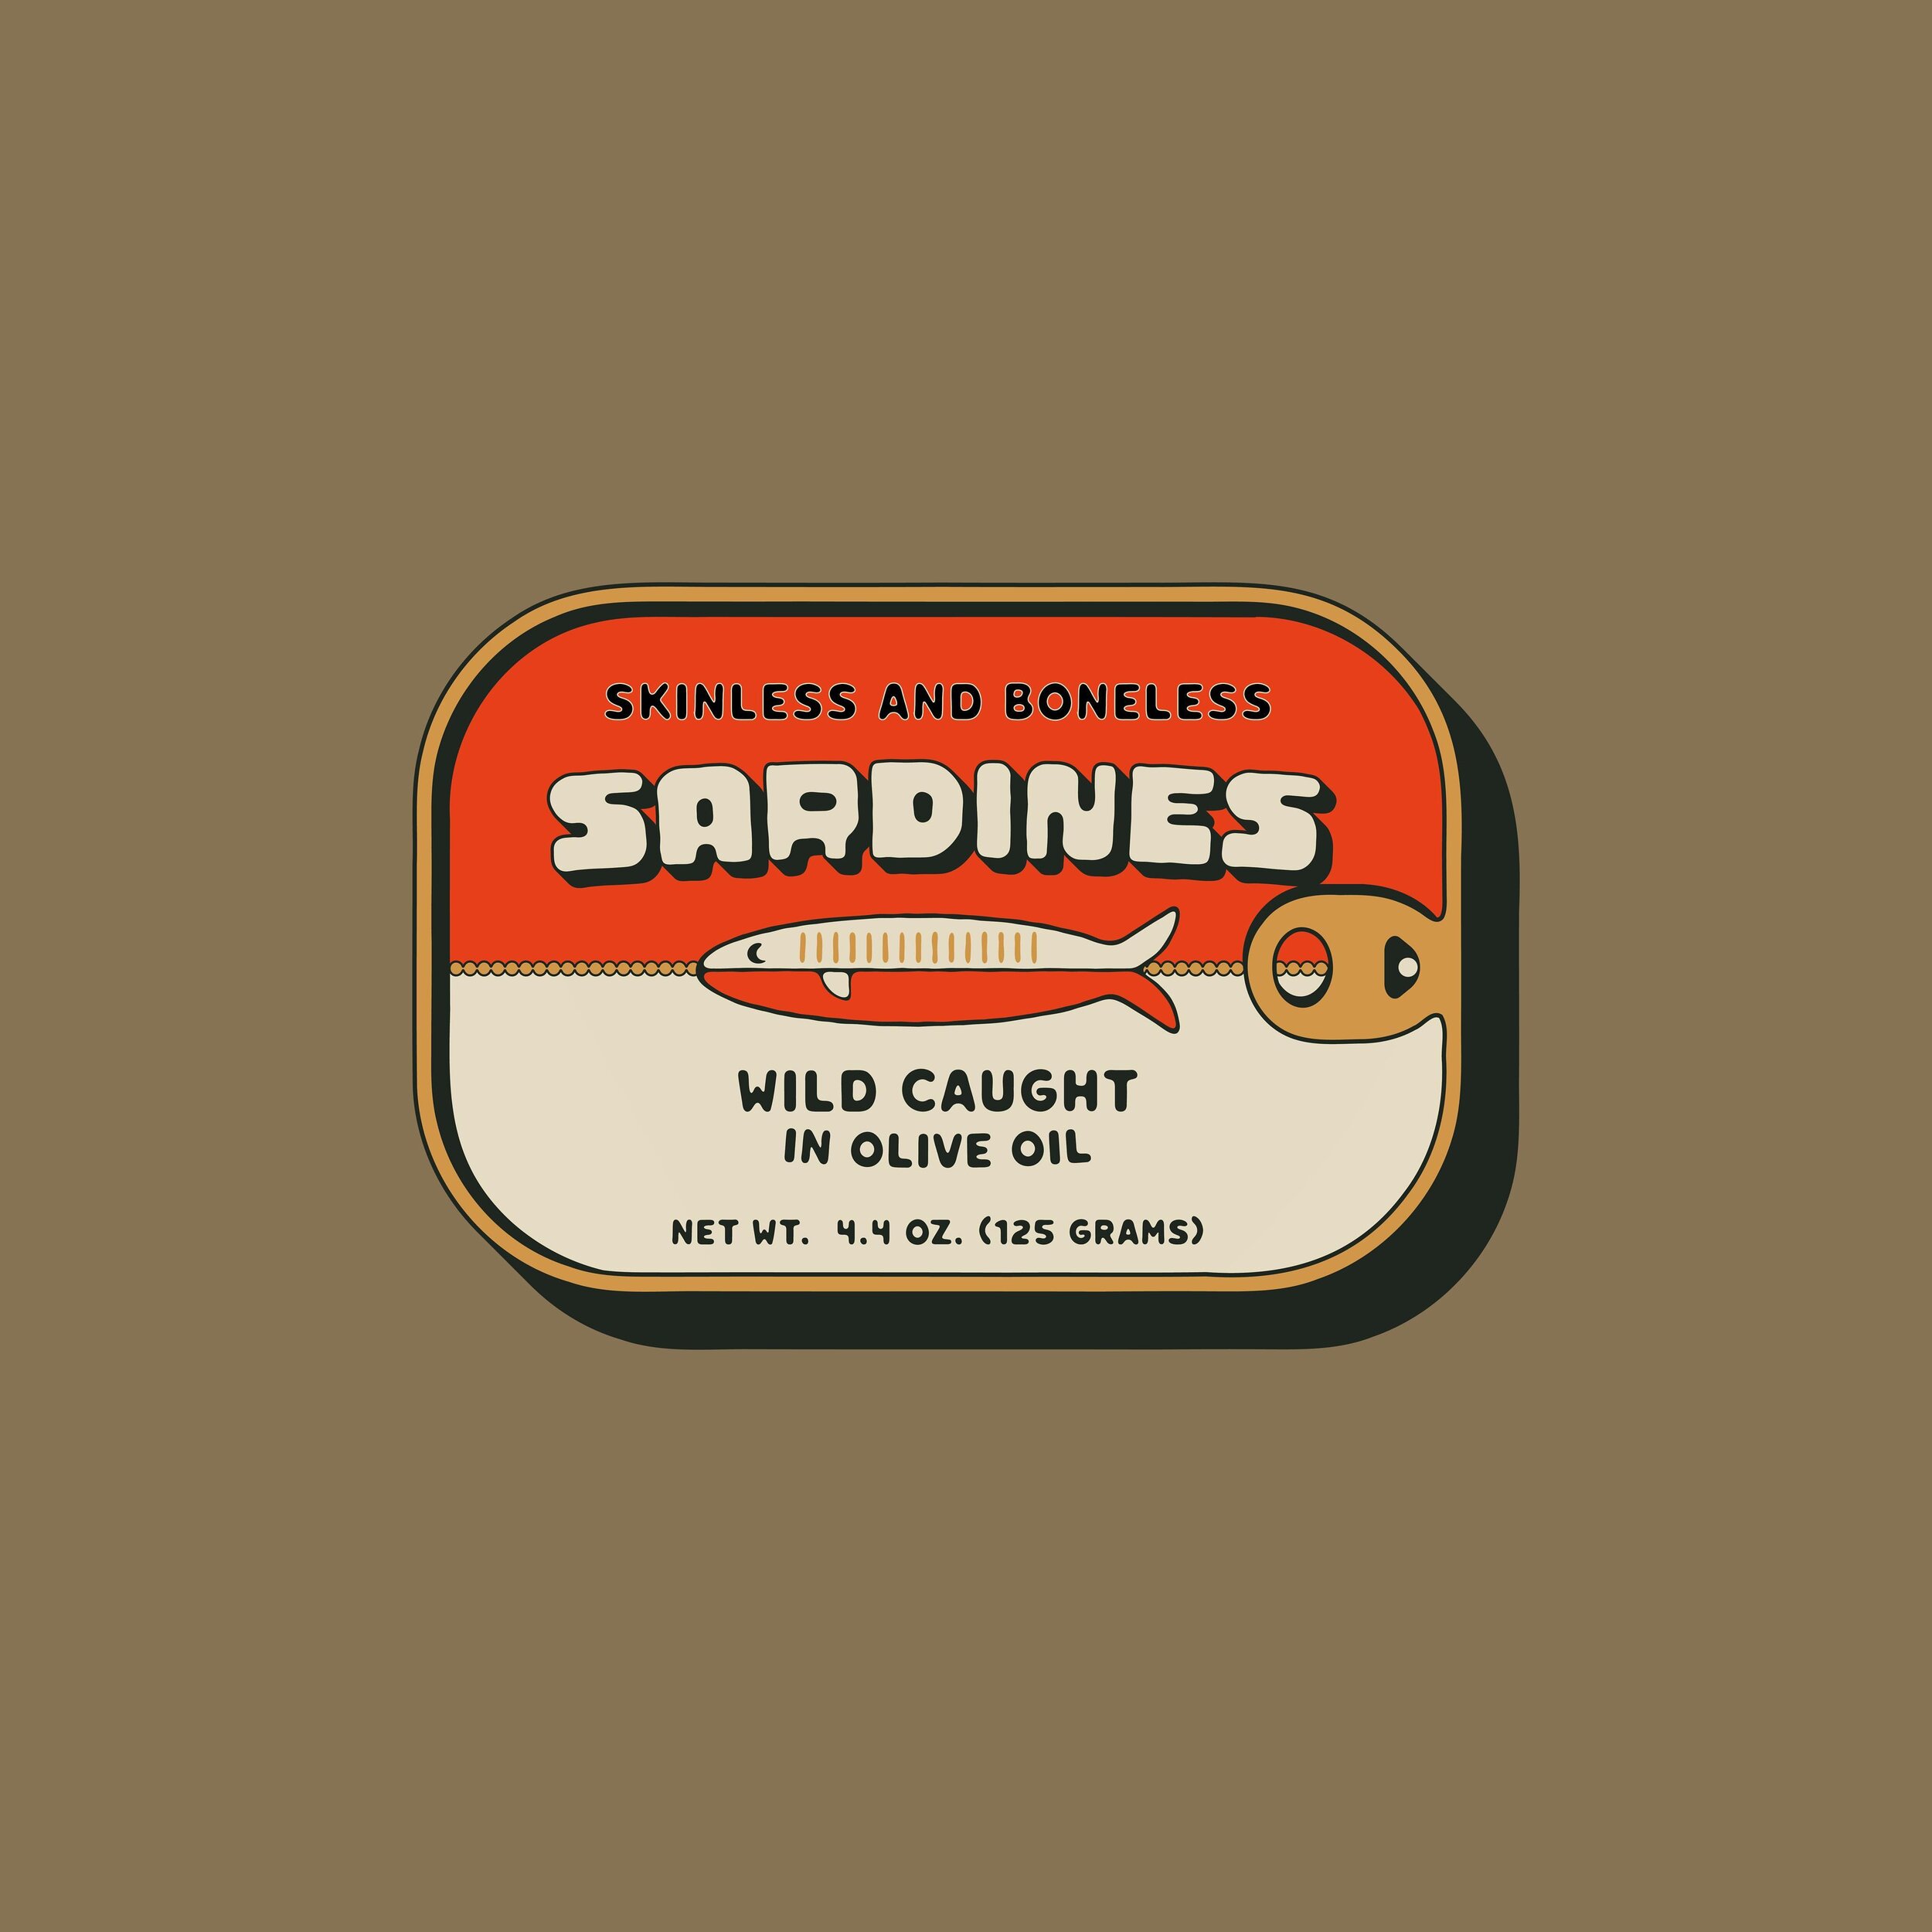 Sardines// Marfa + Ranchero typefaces from the studio

I&rsquo;ll be honest I&rsquo;ve never had a sardine before but I sure do love their packaging sometimes. 

#typedesign #typedesigner #typography #typographyinspired #handmadetype #handcraftedtype